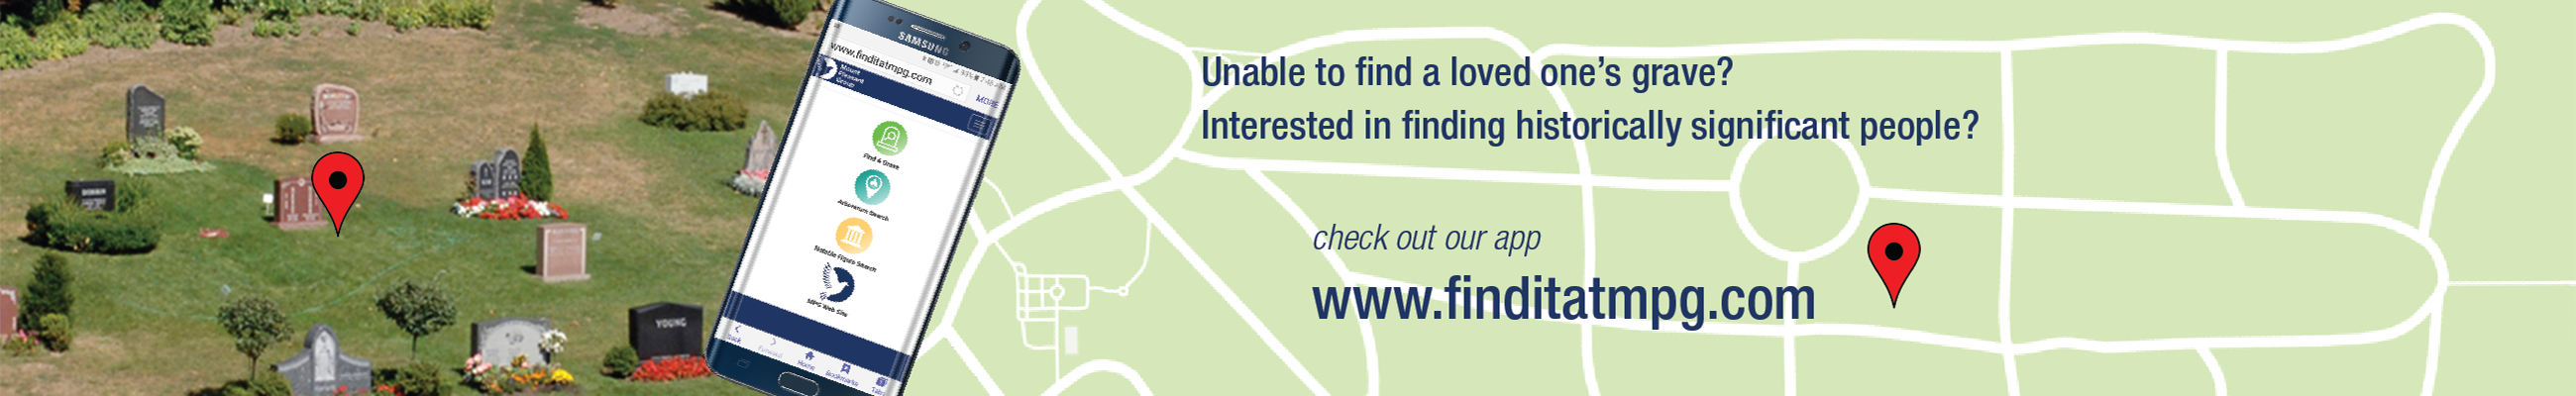 Unable to find a loved one's grave? Interested in findig historically significant people? Check out our app: www.finditatmpg.com.